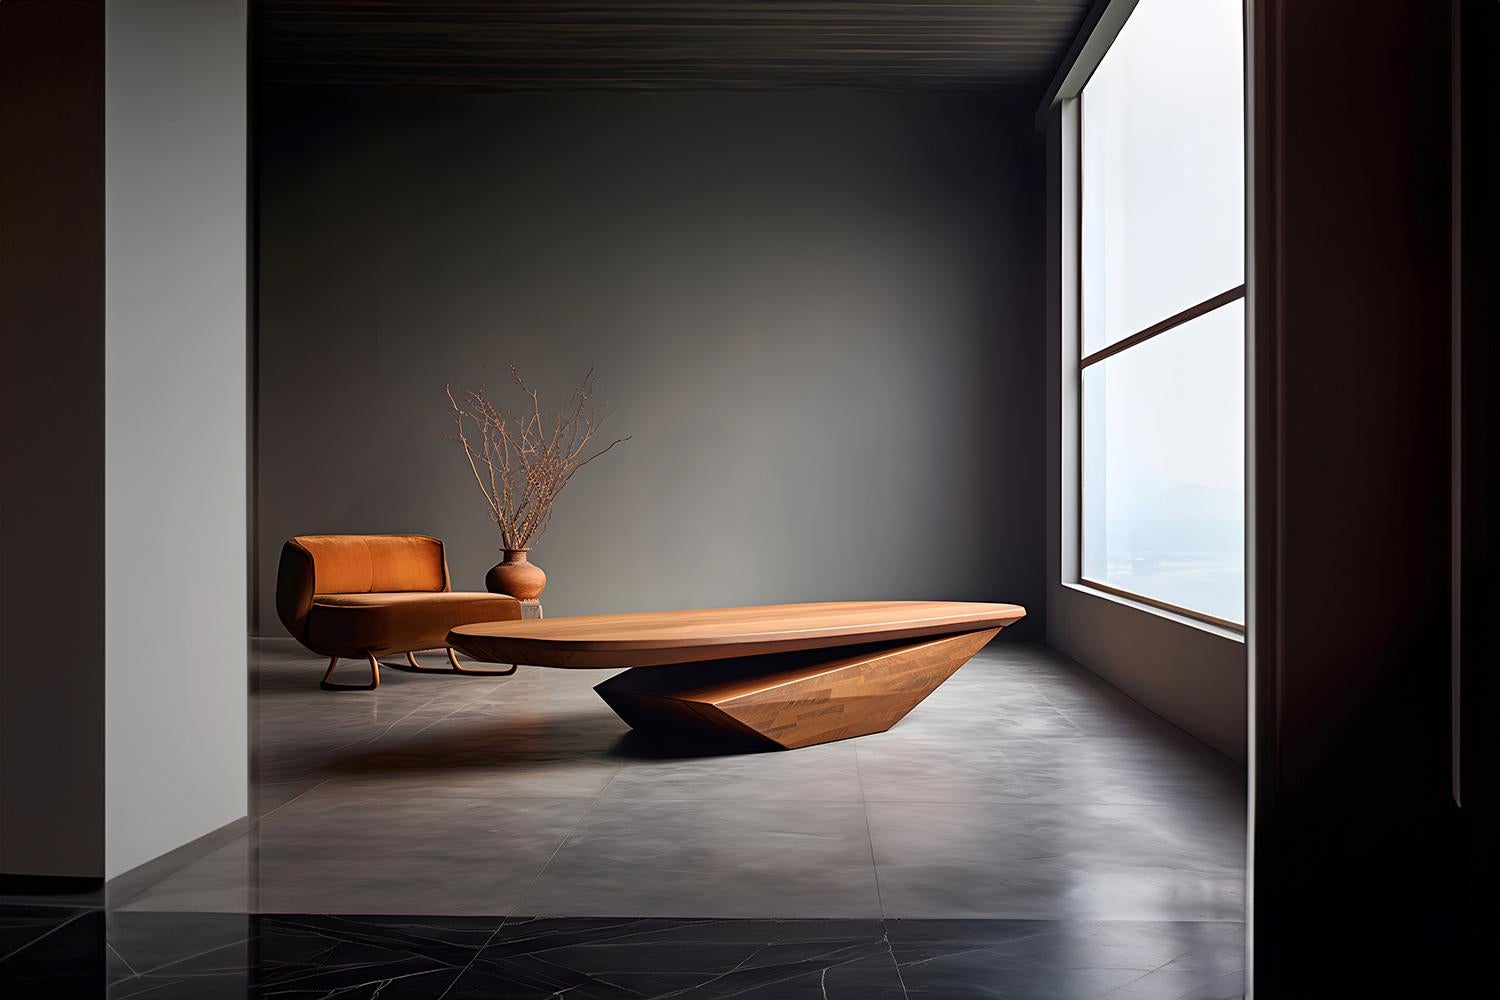 Oval Coffee Table Made of Solid Wood, Center Table Solace S18 by Joel Escalona


The Solace table series, designed by Joel Escalona, is a furniture collection that exudes balance and presence, thanks to its sensuous, dense, and irregular shapes.